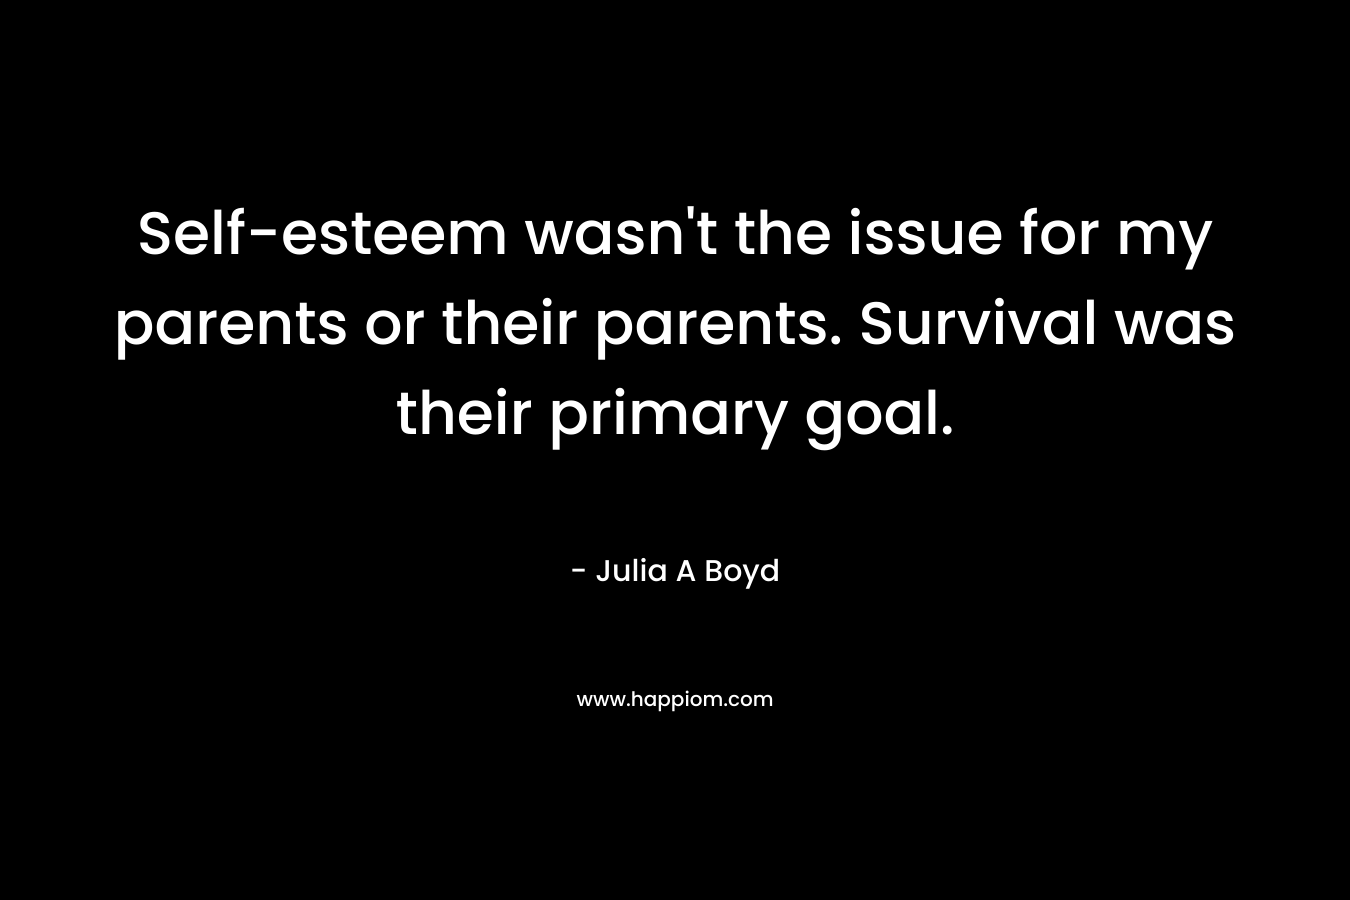 Self-esteem wasn't the issue for my parents or their parents. Survival was their primary goal.